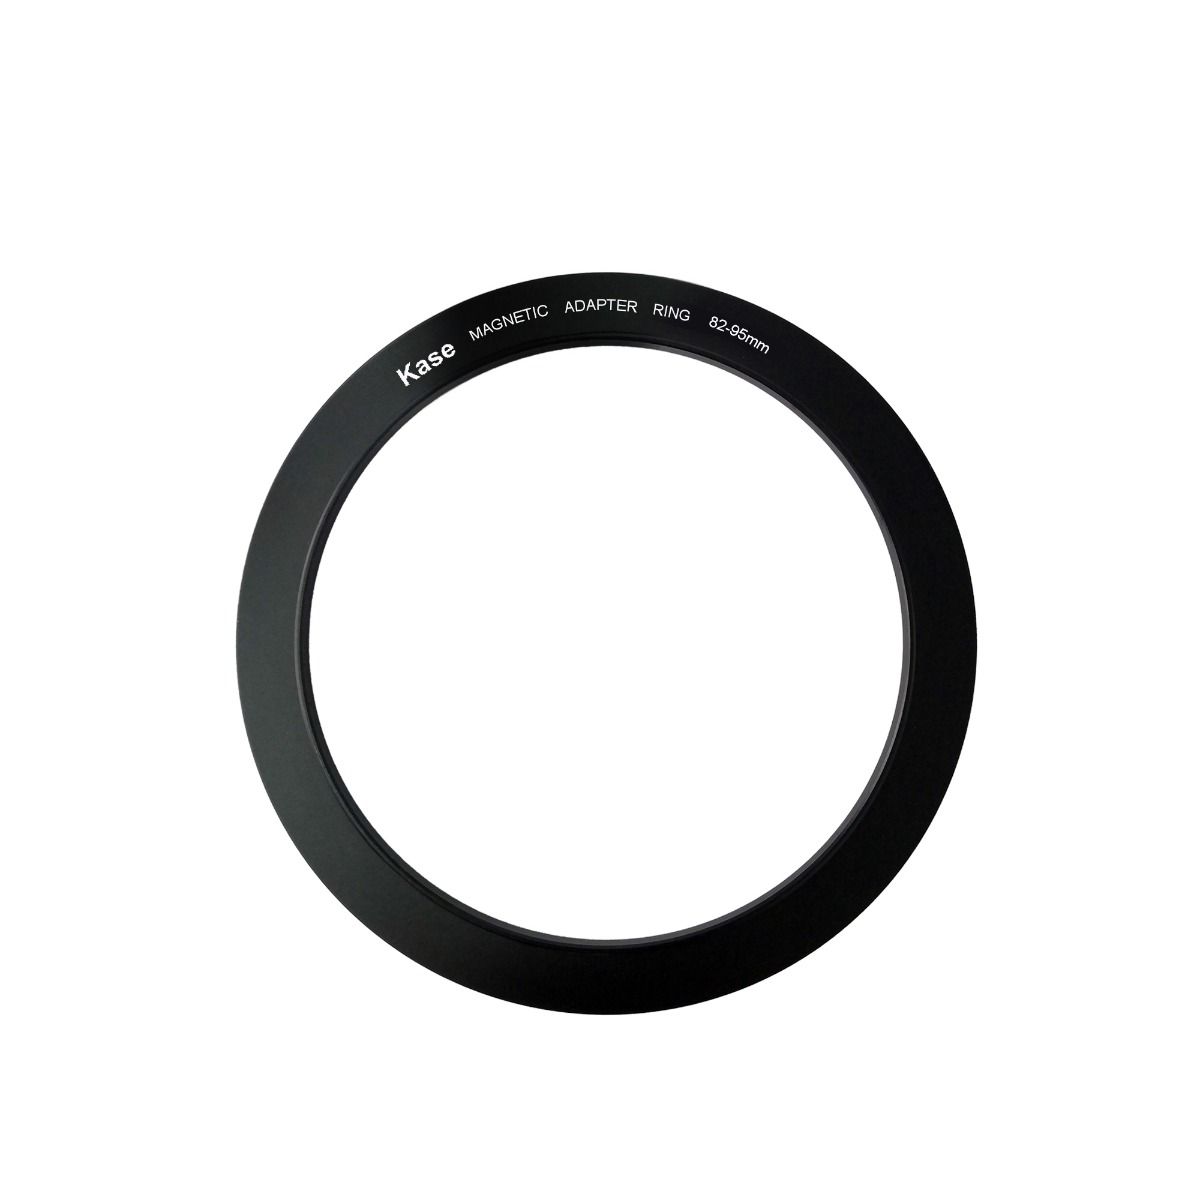 Product Image of Kase 67-95mm magnetic circular step up ring